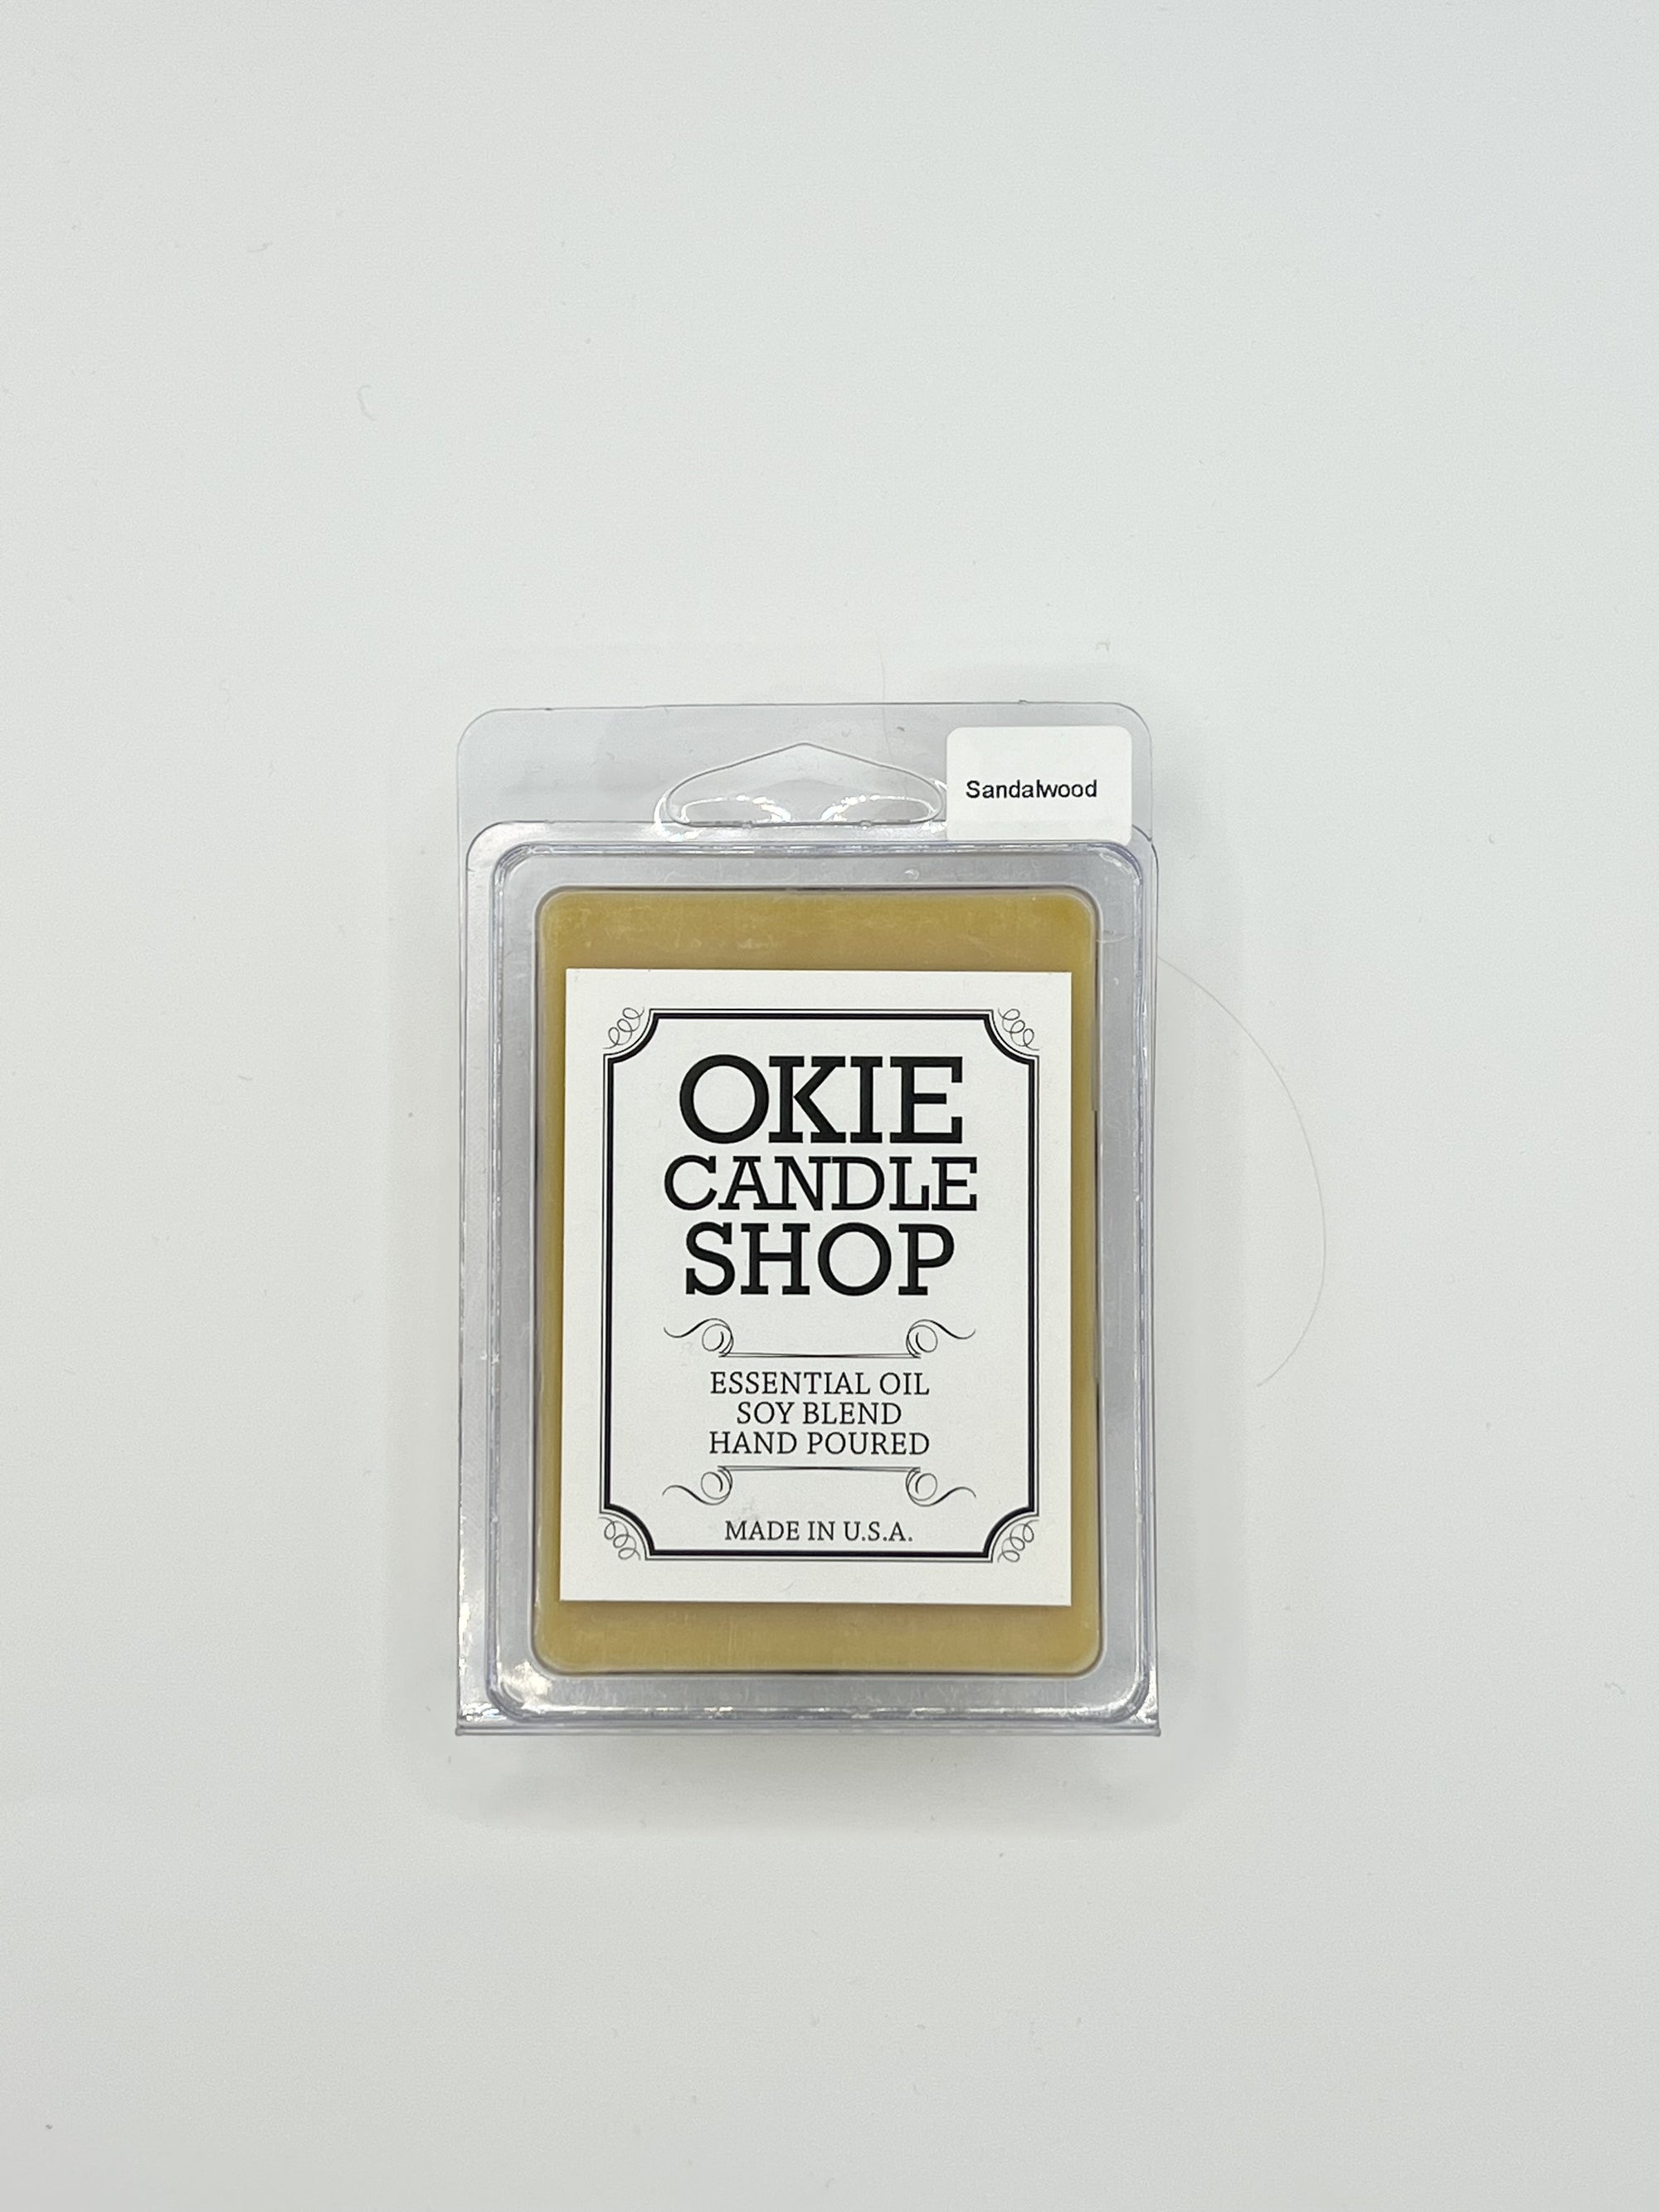 Okie Candle Sandlewood - Wax Melts